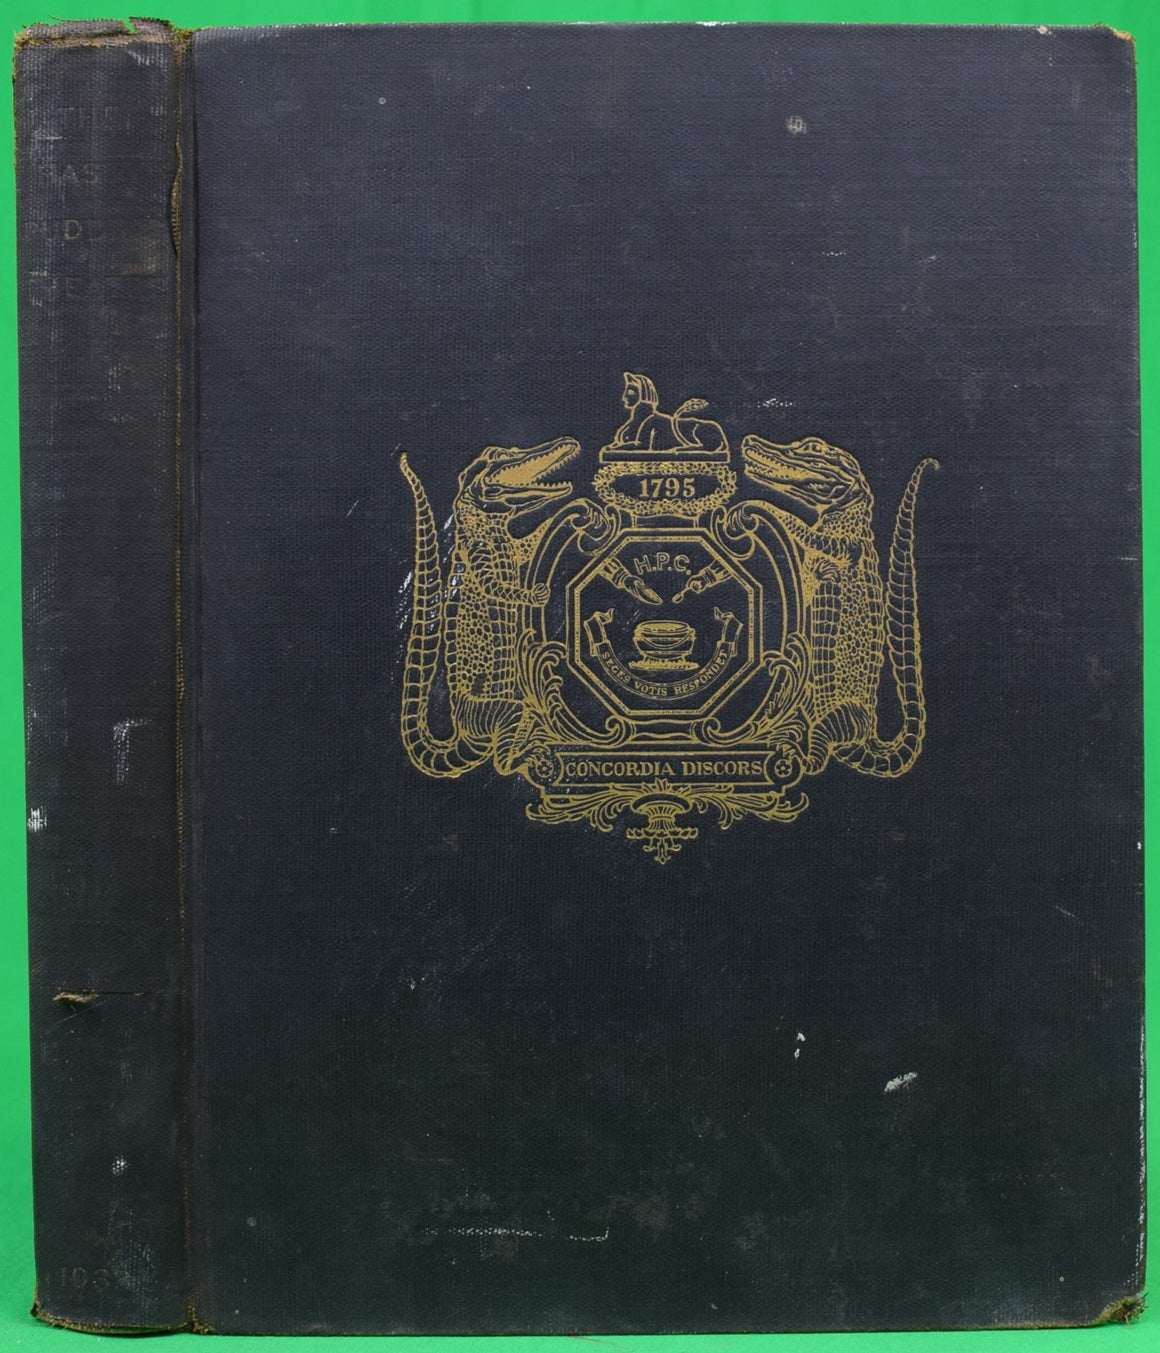 "An Illustrated History Of Hasty Pudding Club Theatricals" 1933 (SOLD)